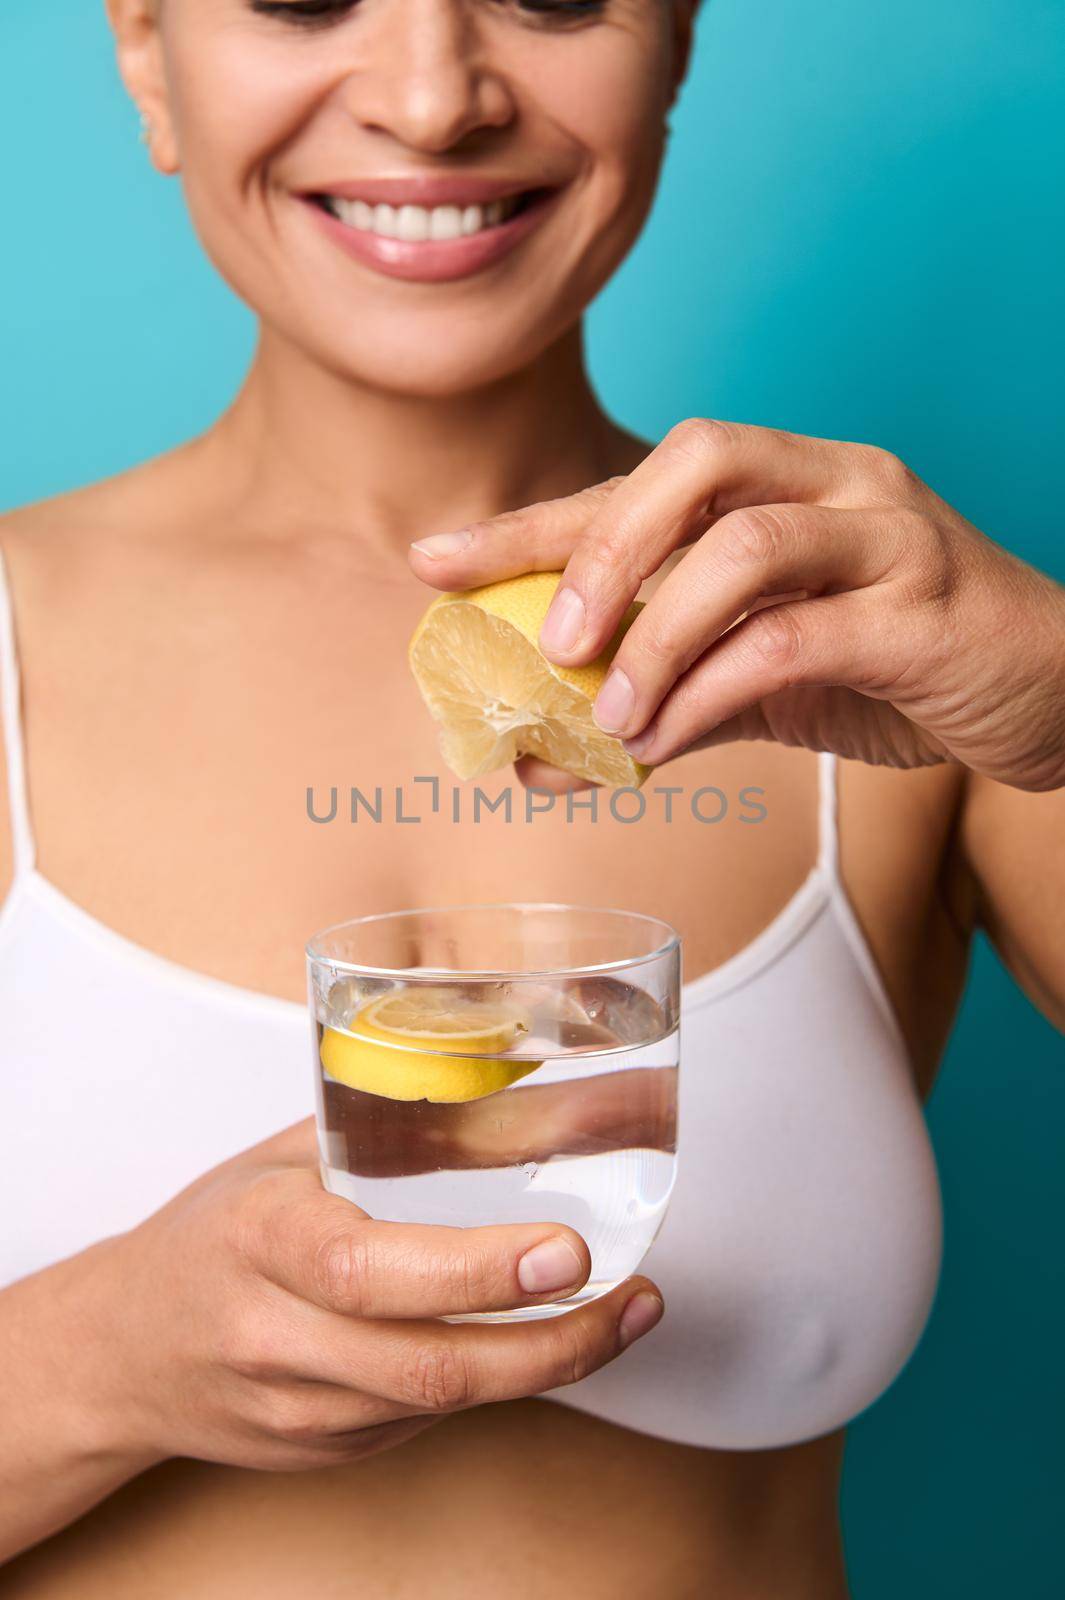 Soft focus in the hands of blurred pretty beautiful woman smiling toothy smile squeezing a fresh lemon juice into a glass with water, preparing lemon water, isolated on blue background with copy space by artgf